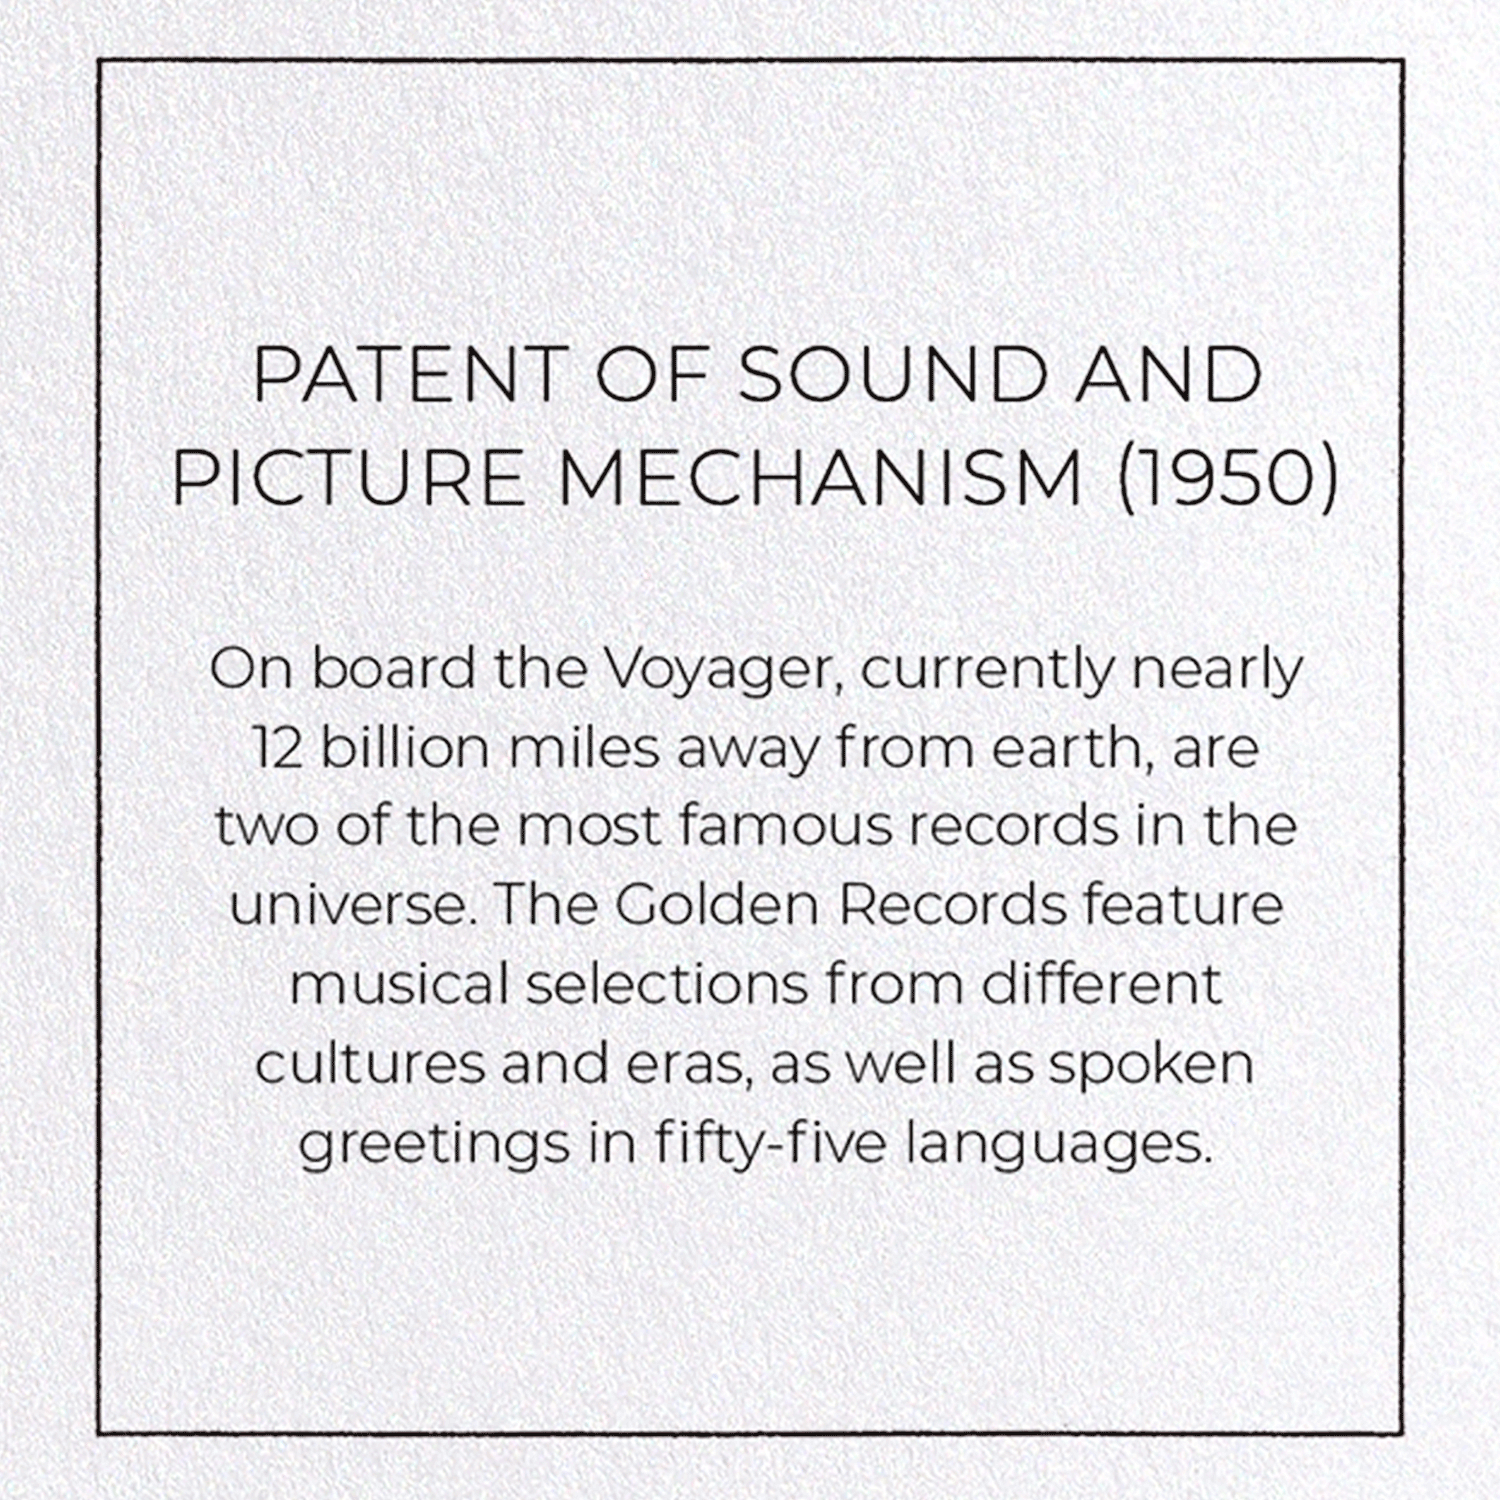 PATENT OF SOUND AND PICTURE MECHANISM (1950)